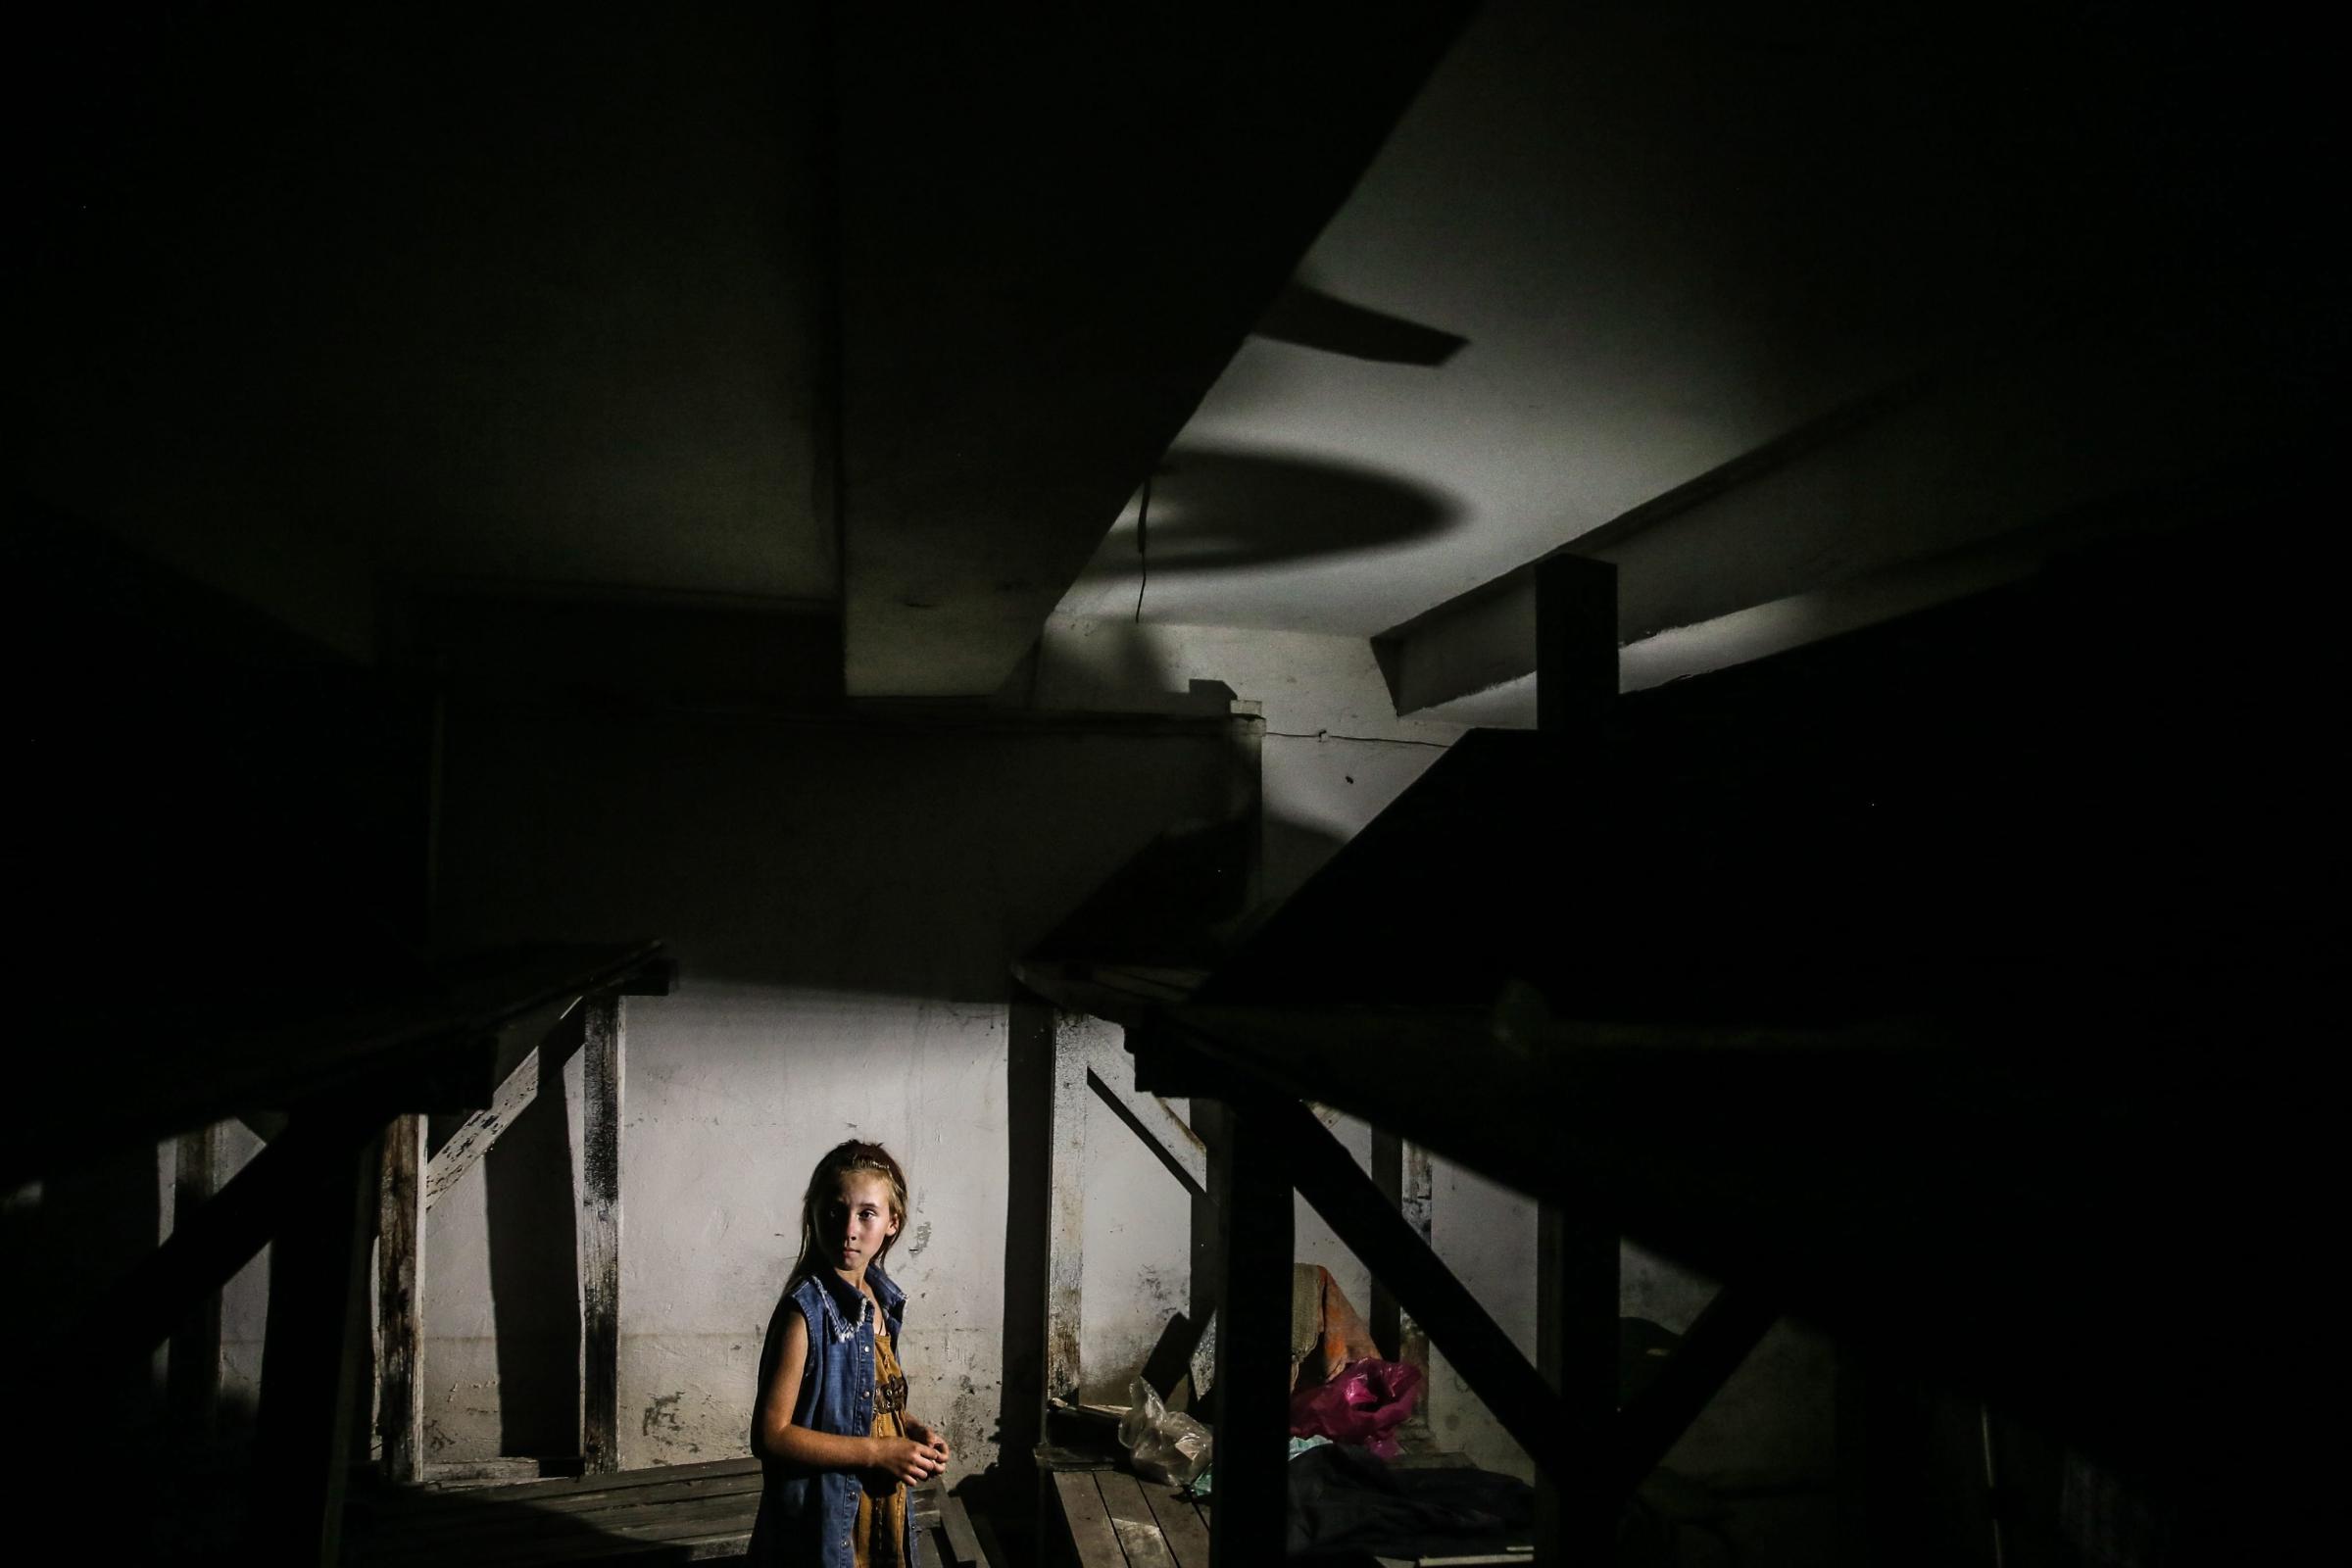 Crisis in UkraTatiana, 9, stands in a shelter in Ilovaysk, some 50km from Donetsk, eastern Ukraine on August 14, 2014. ine